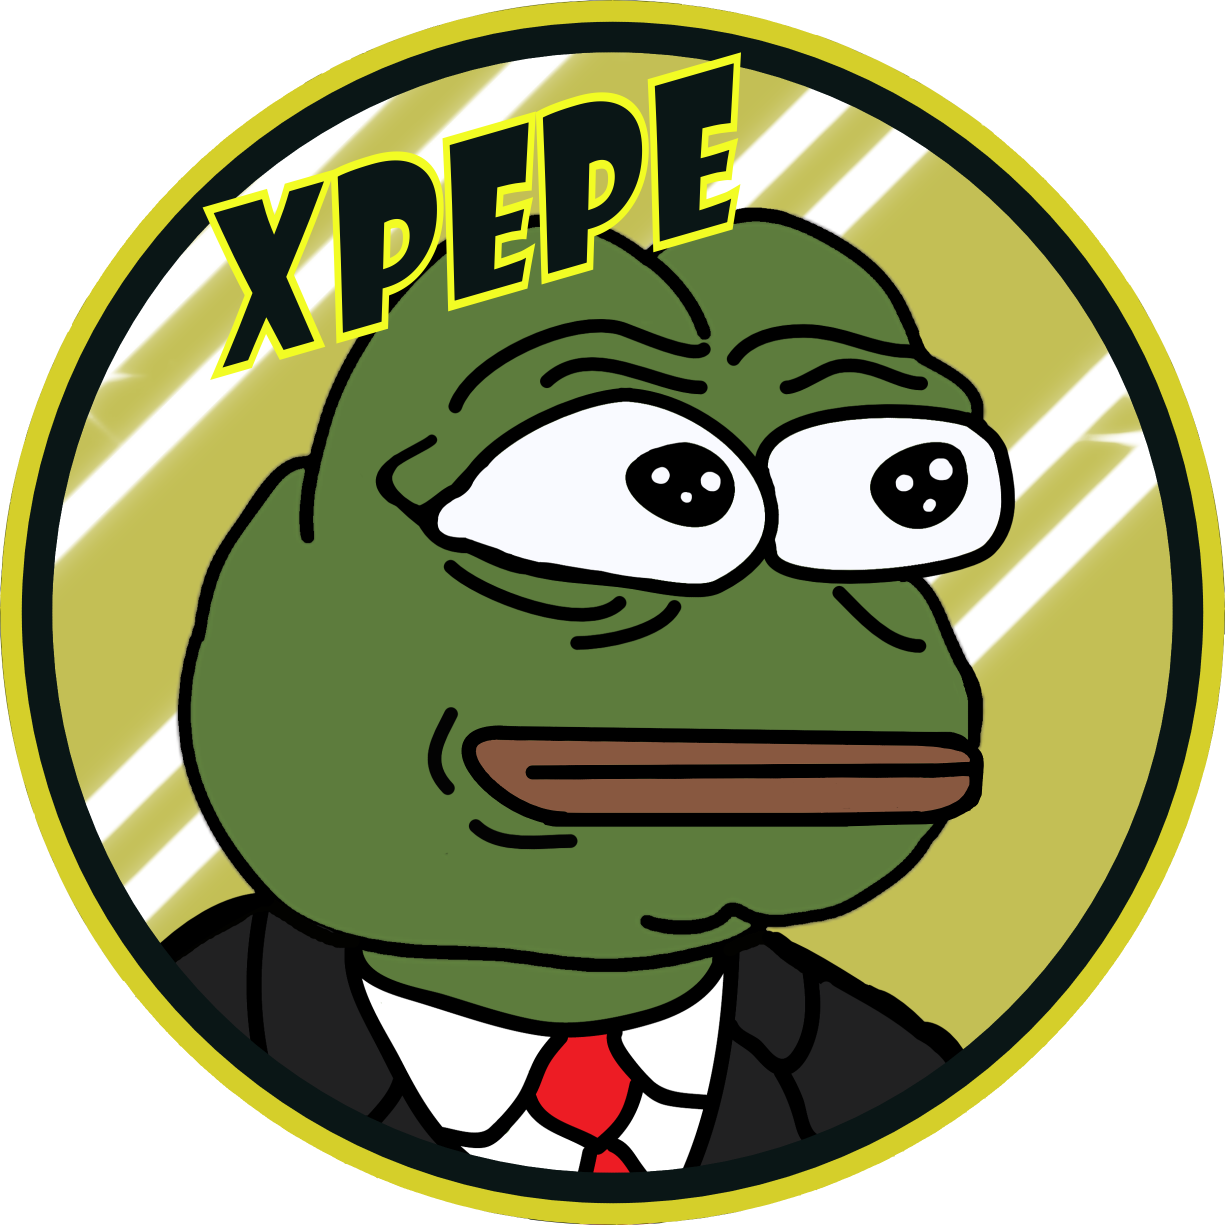 High Quality Xpepe pepe xrpl xrp crypto coin Blank Meme Template